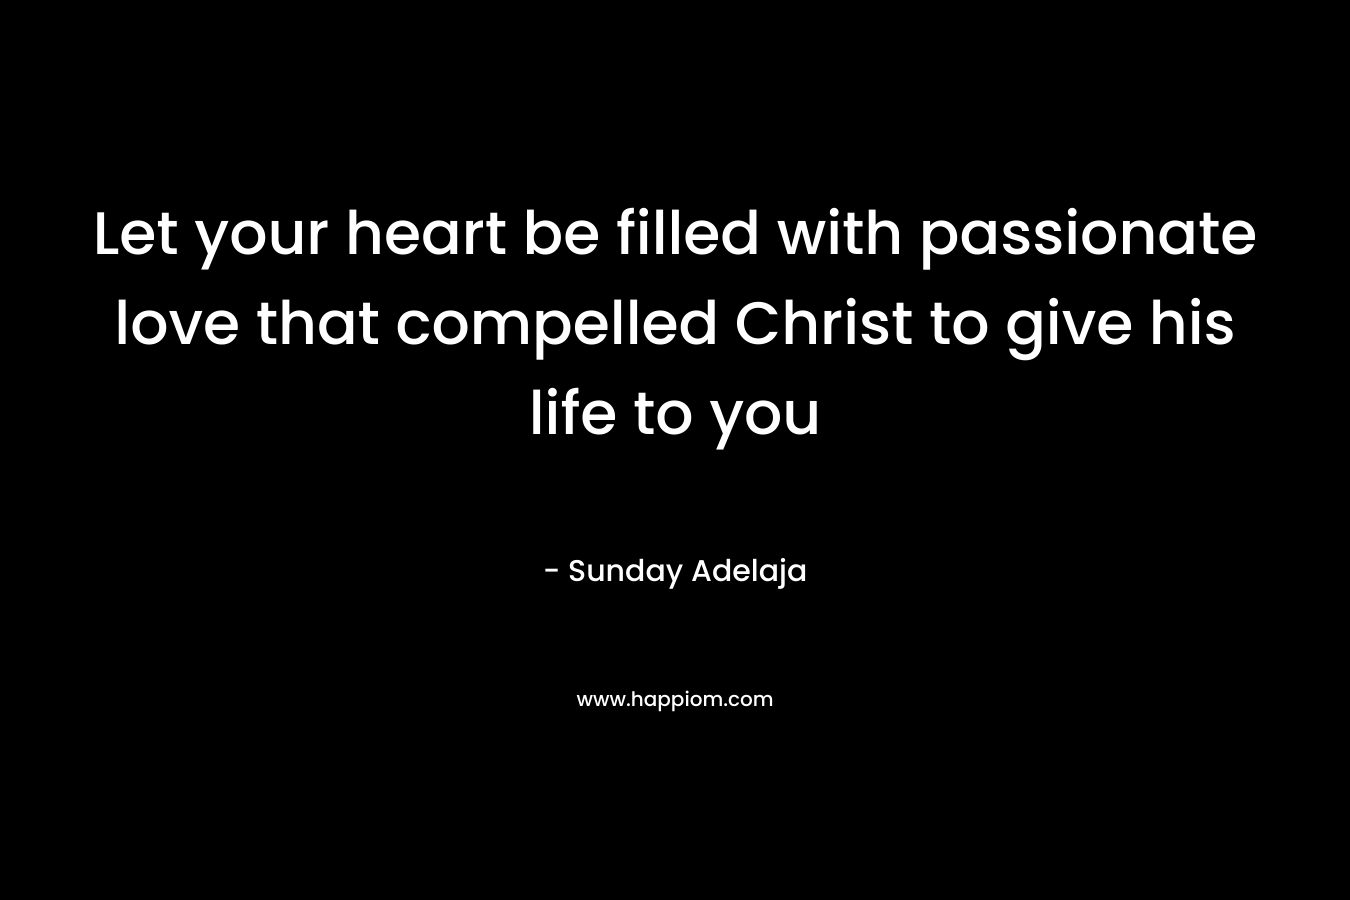 Let your heart be filled with passionate love that compelled Christ to give his life to you